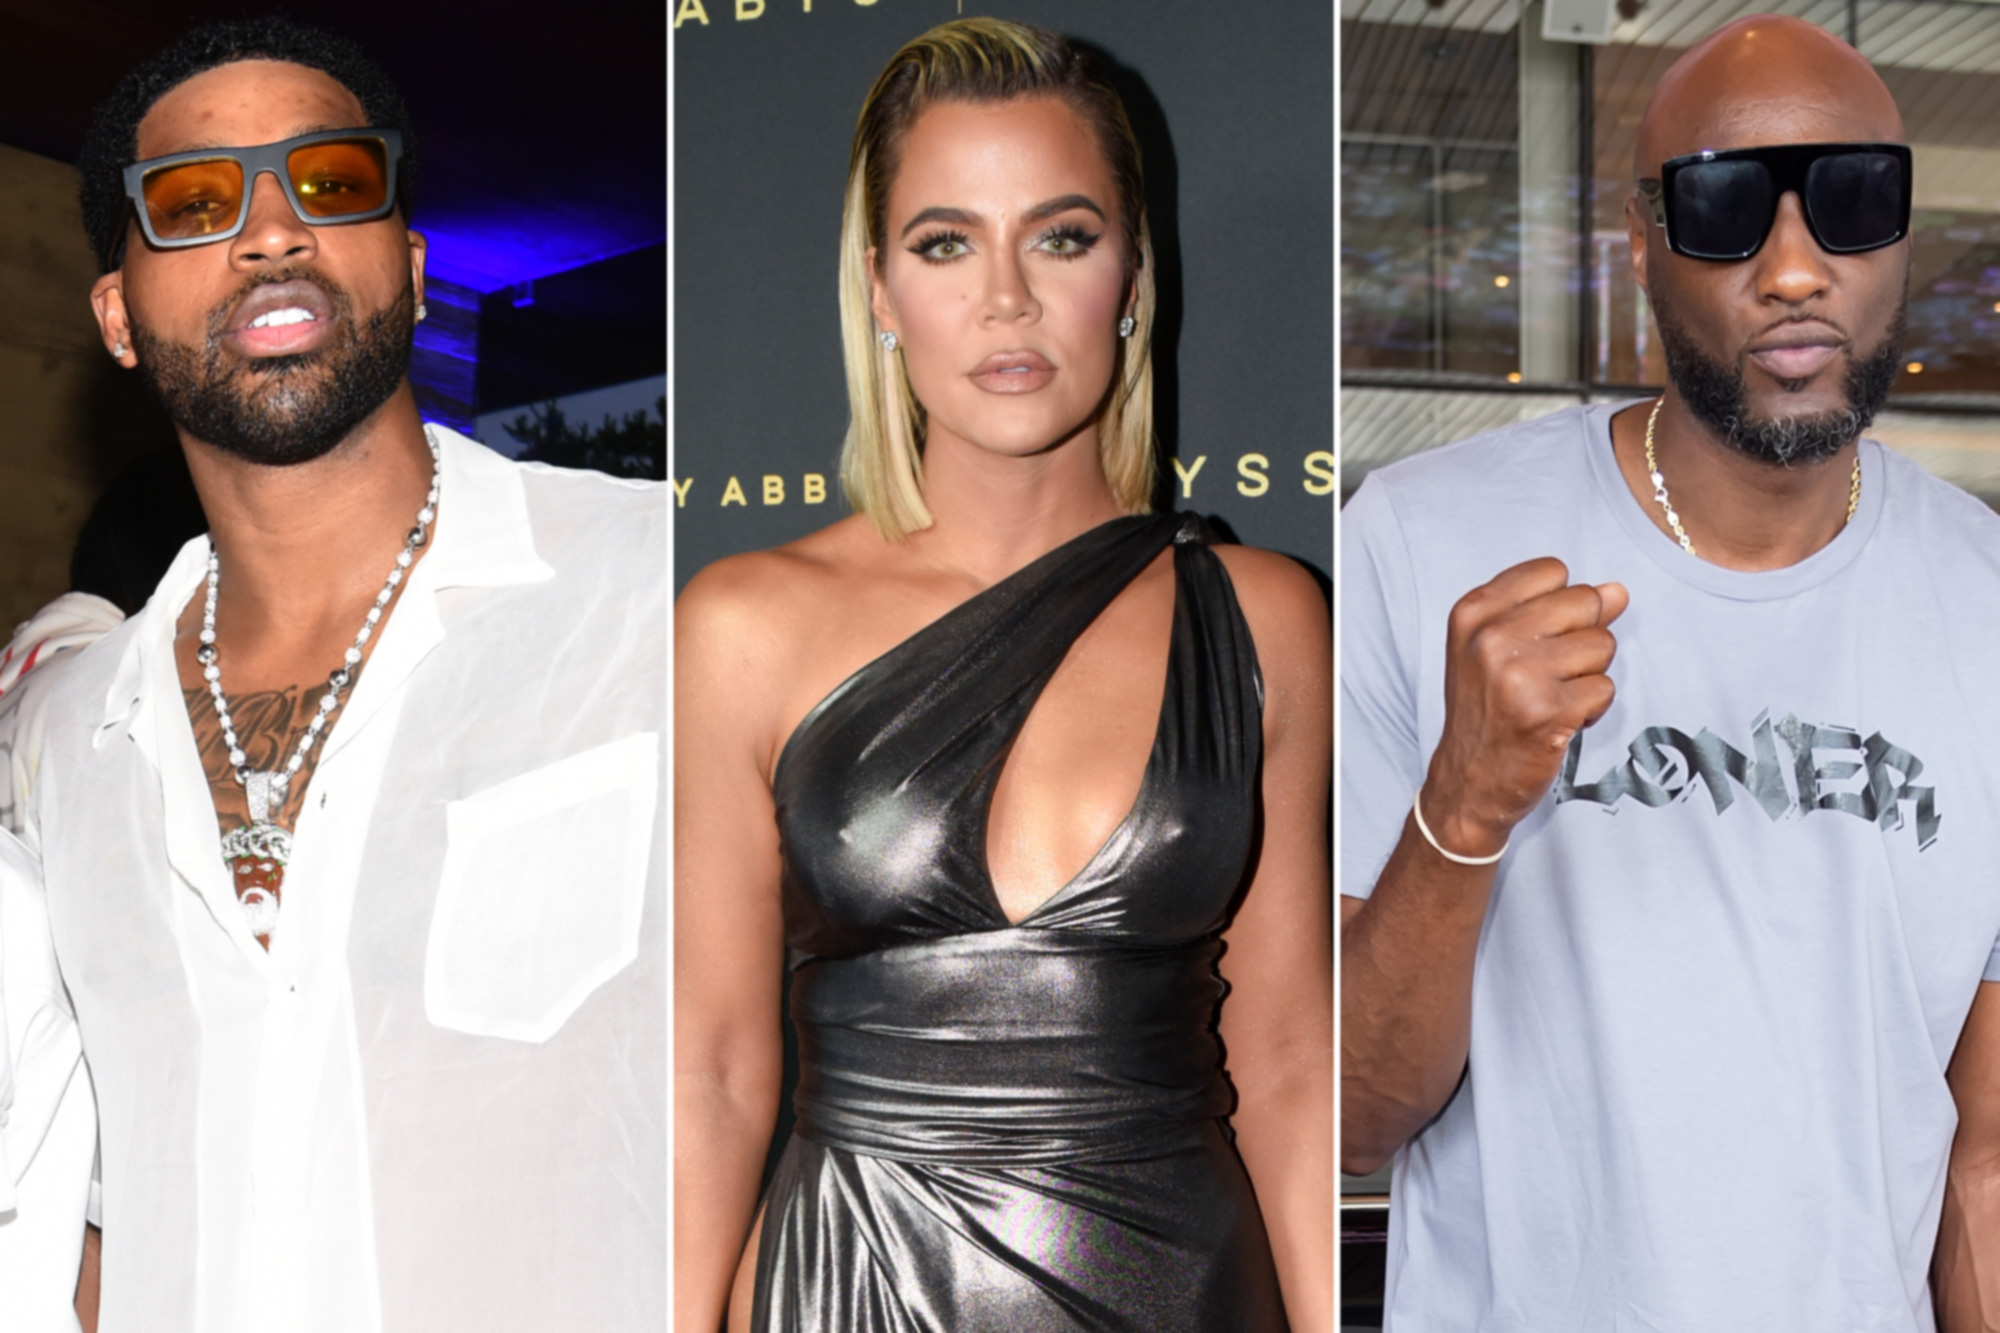 Lamar Odom wants to reconnect with Khloe after Tristan cheating scandal